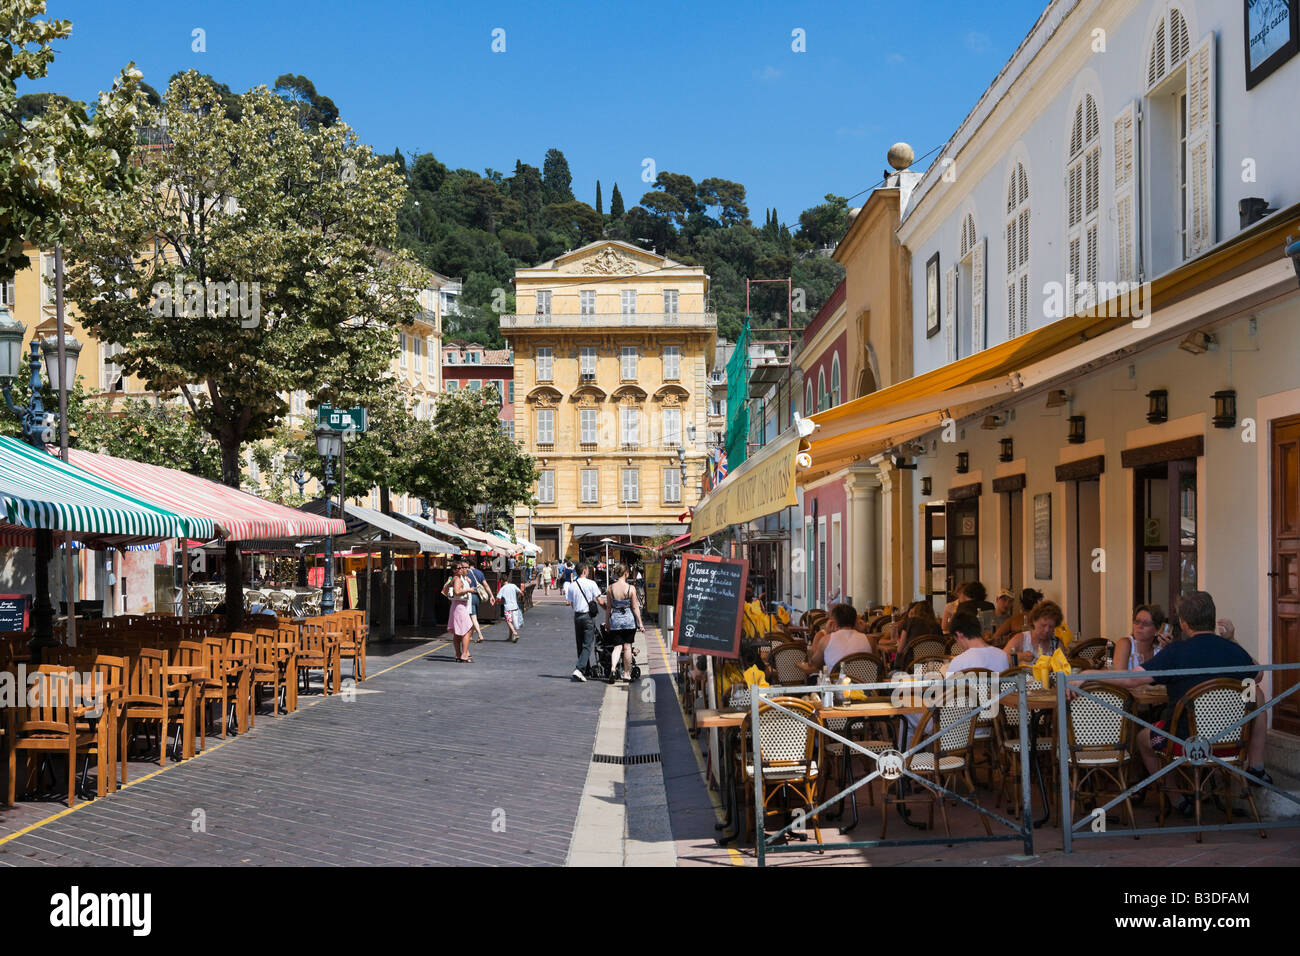 Restaurants by the Marche aux Fleurs in Cours Saleya in the old town (Vieux Nice), Nice, Cote d'Azur, French Riviera, France Stock Photo